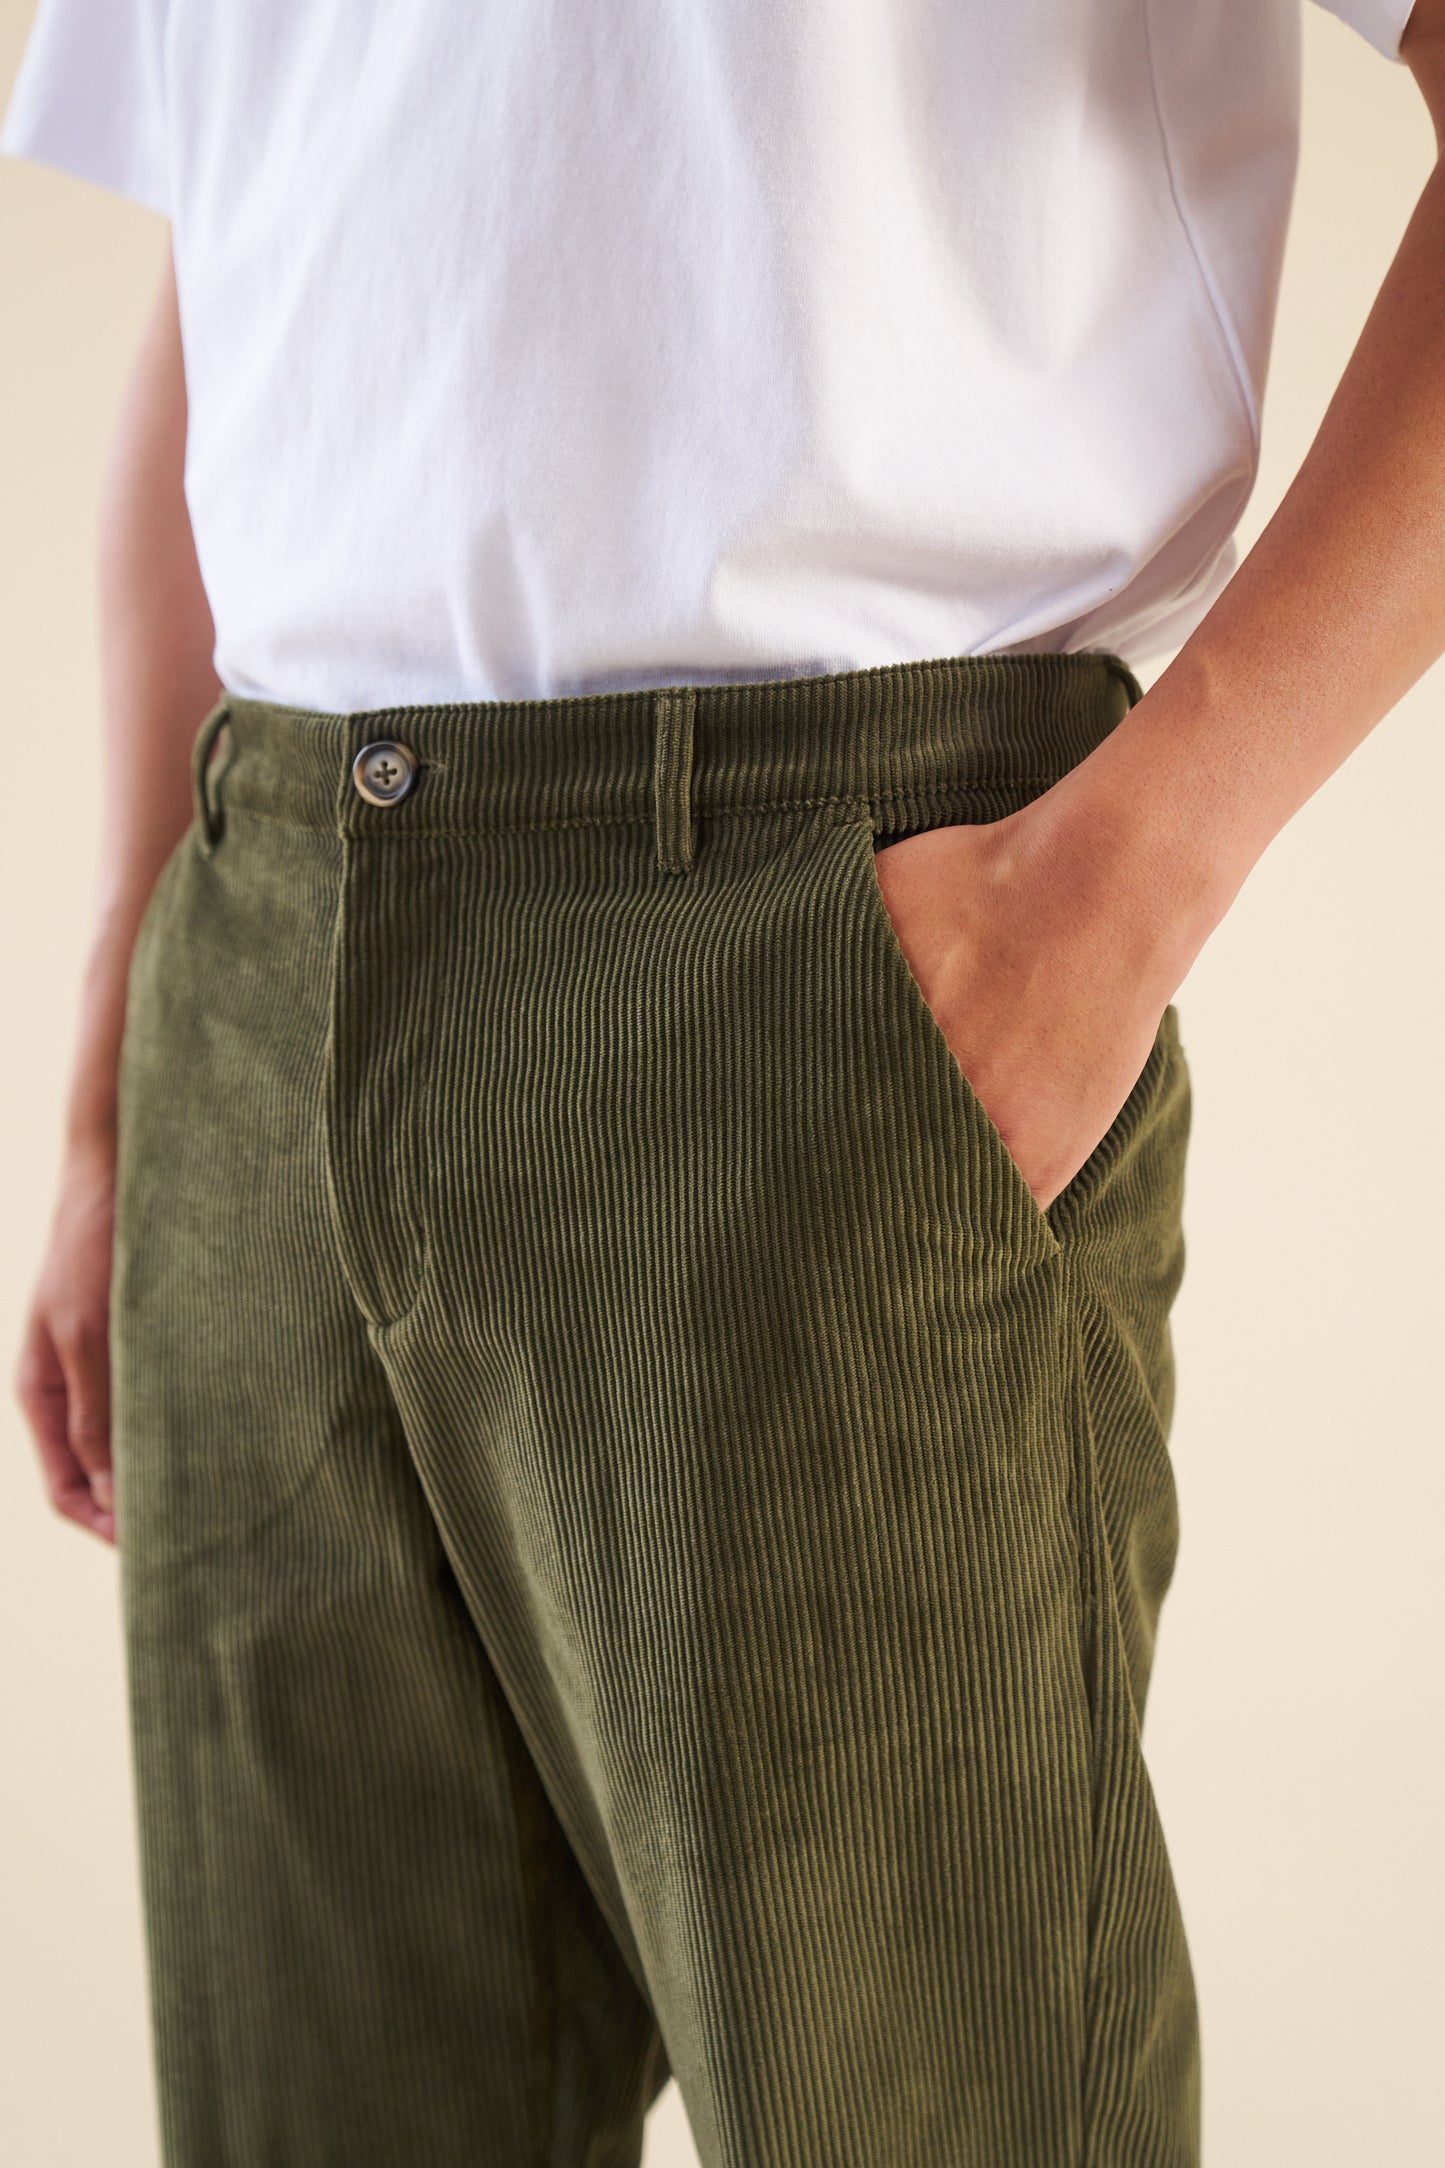 Load image into Gallery viewer, bound Army Green Corduroy Trousers
